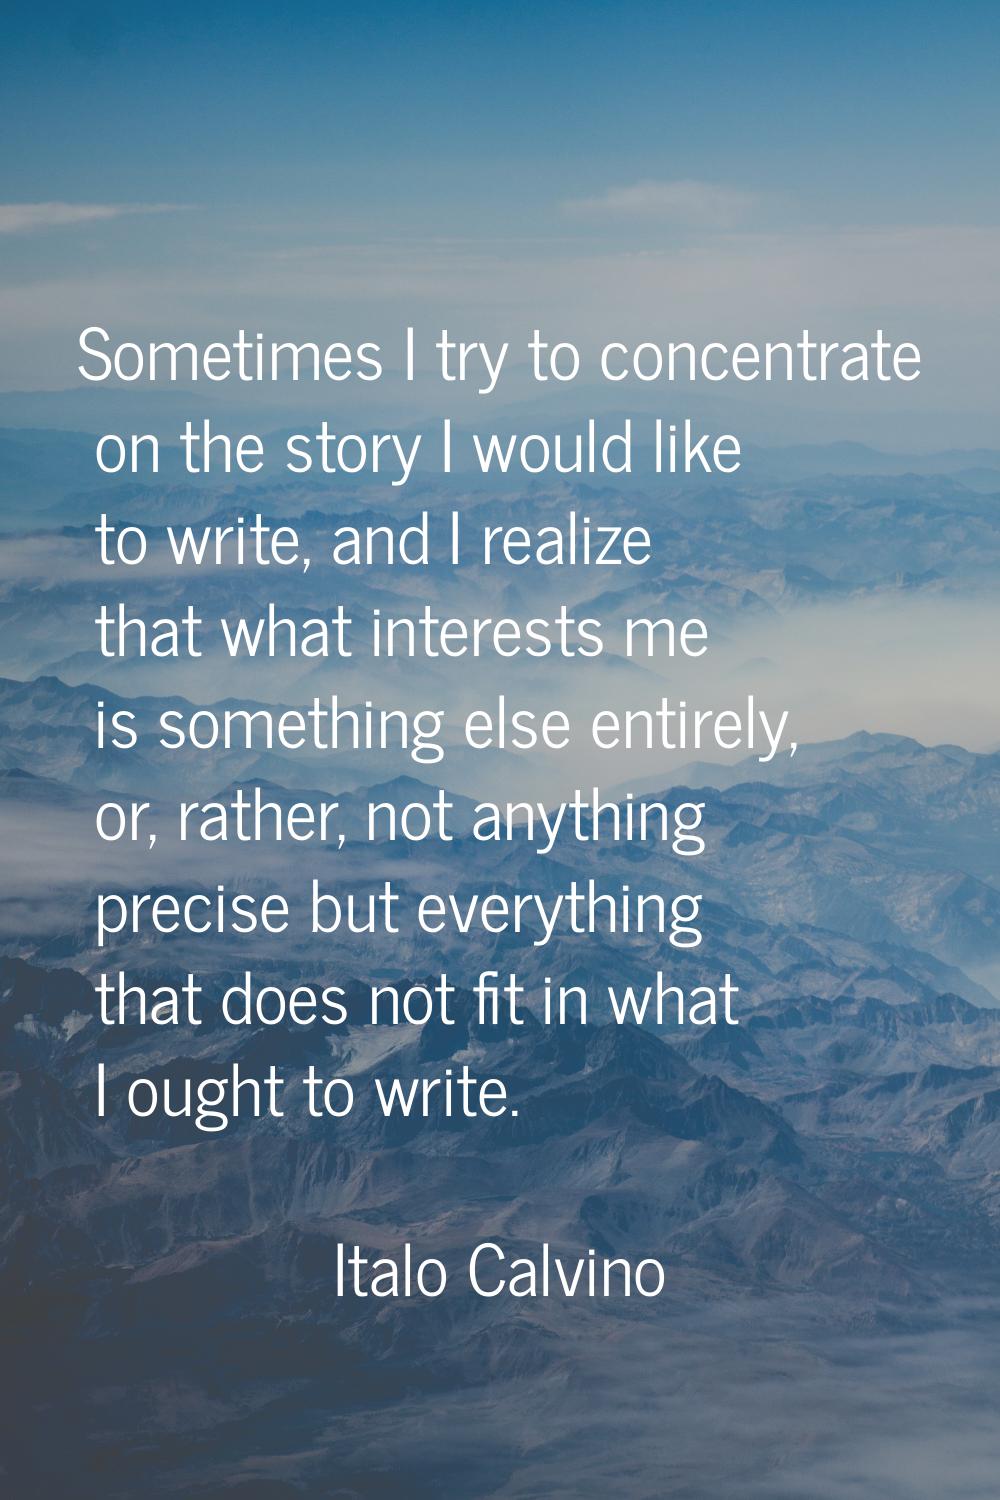 Sometimes I try to concentrate on the story I would like to write, and I realize that what interest